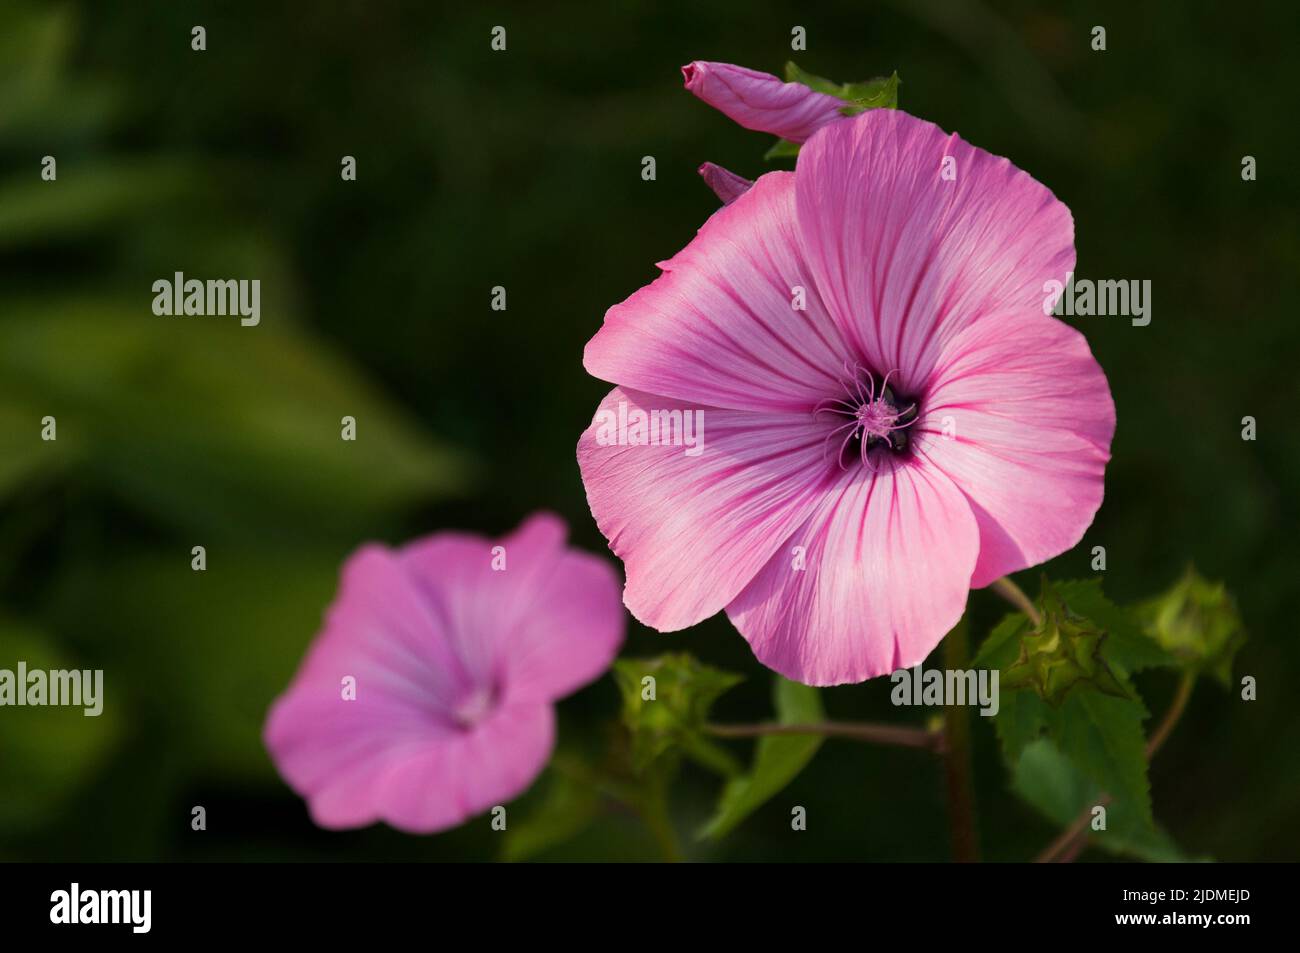 petals of pink lavatera flowers in garden Stock Photo